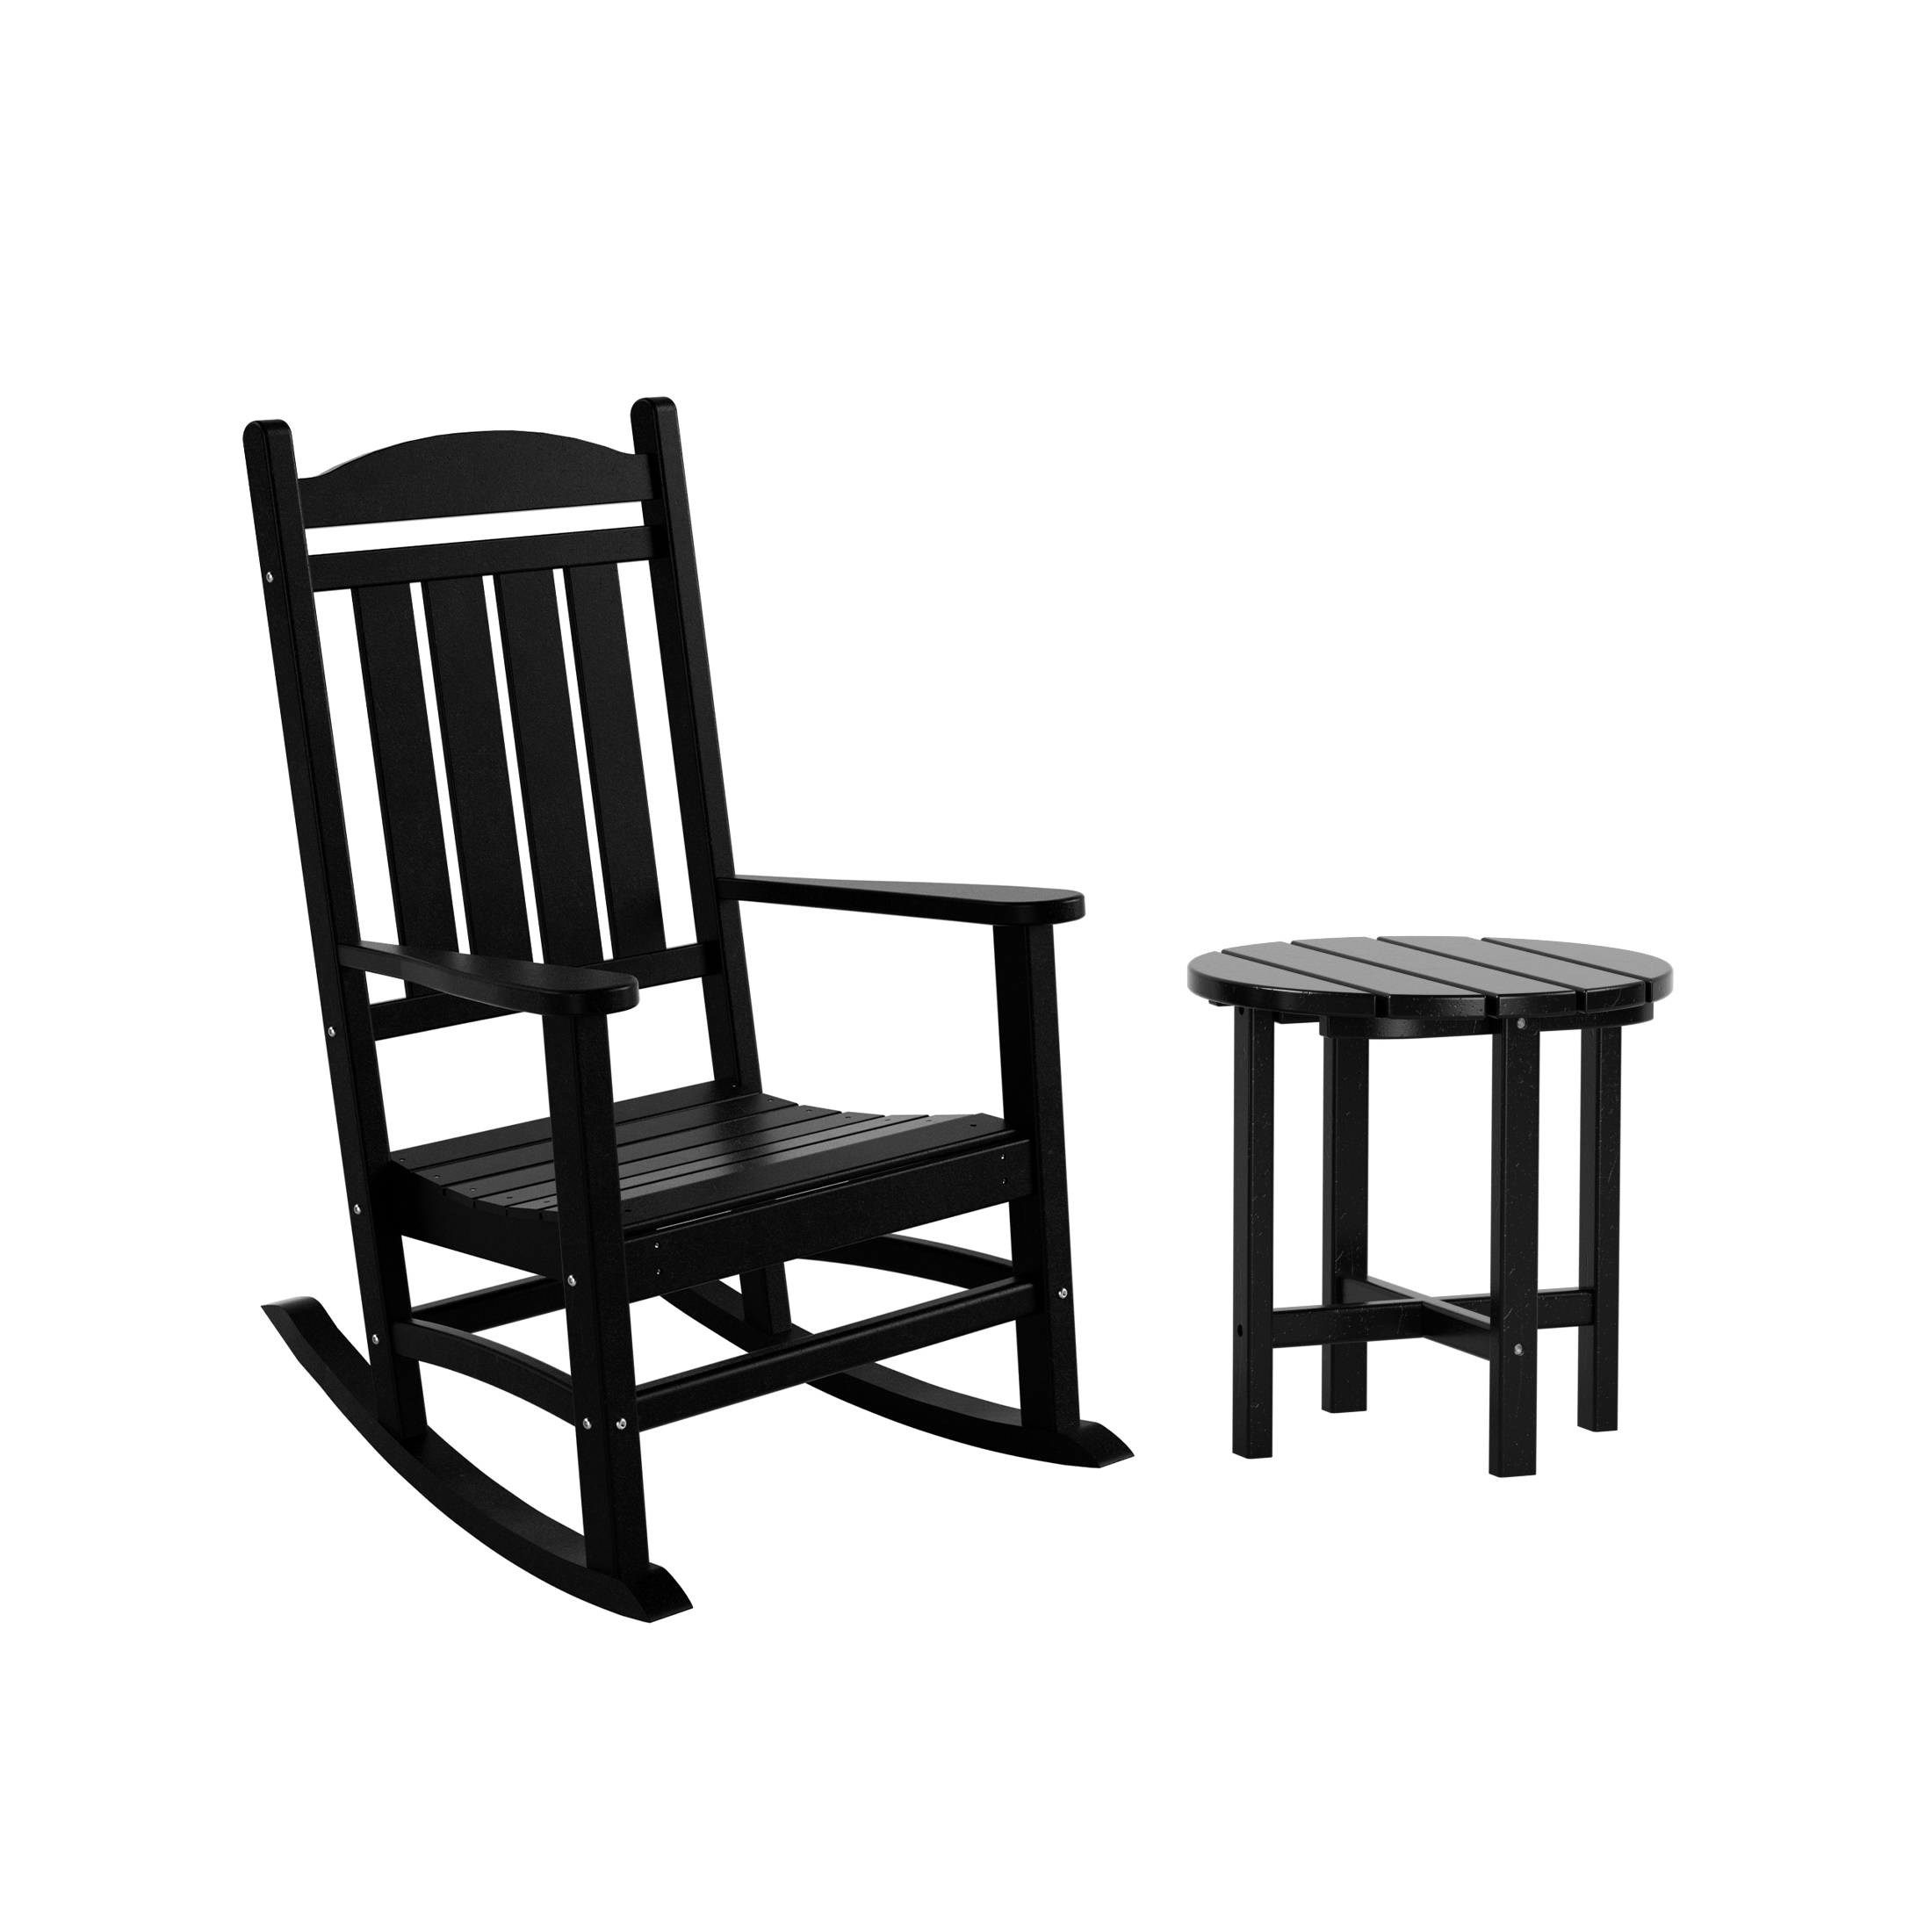 WestinTrends 2-Pieces Set Outdoor Rocking Chair w/ Round Side Table Included, Black - image 4 of 7